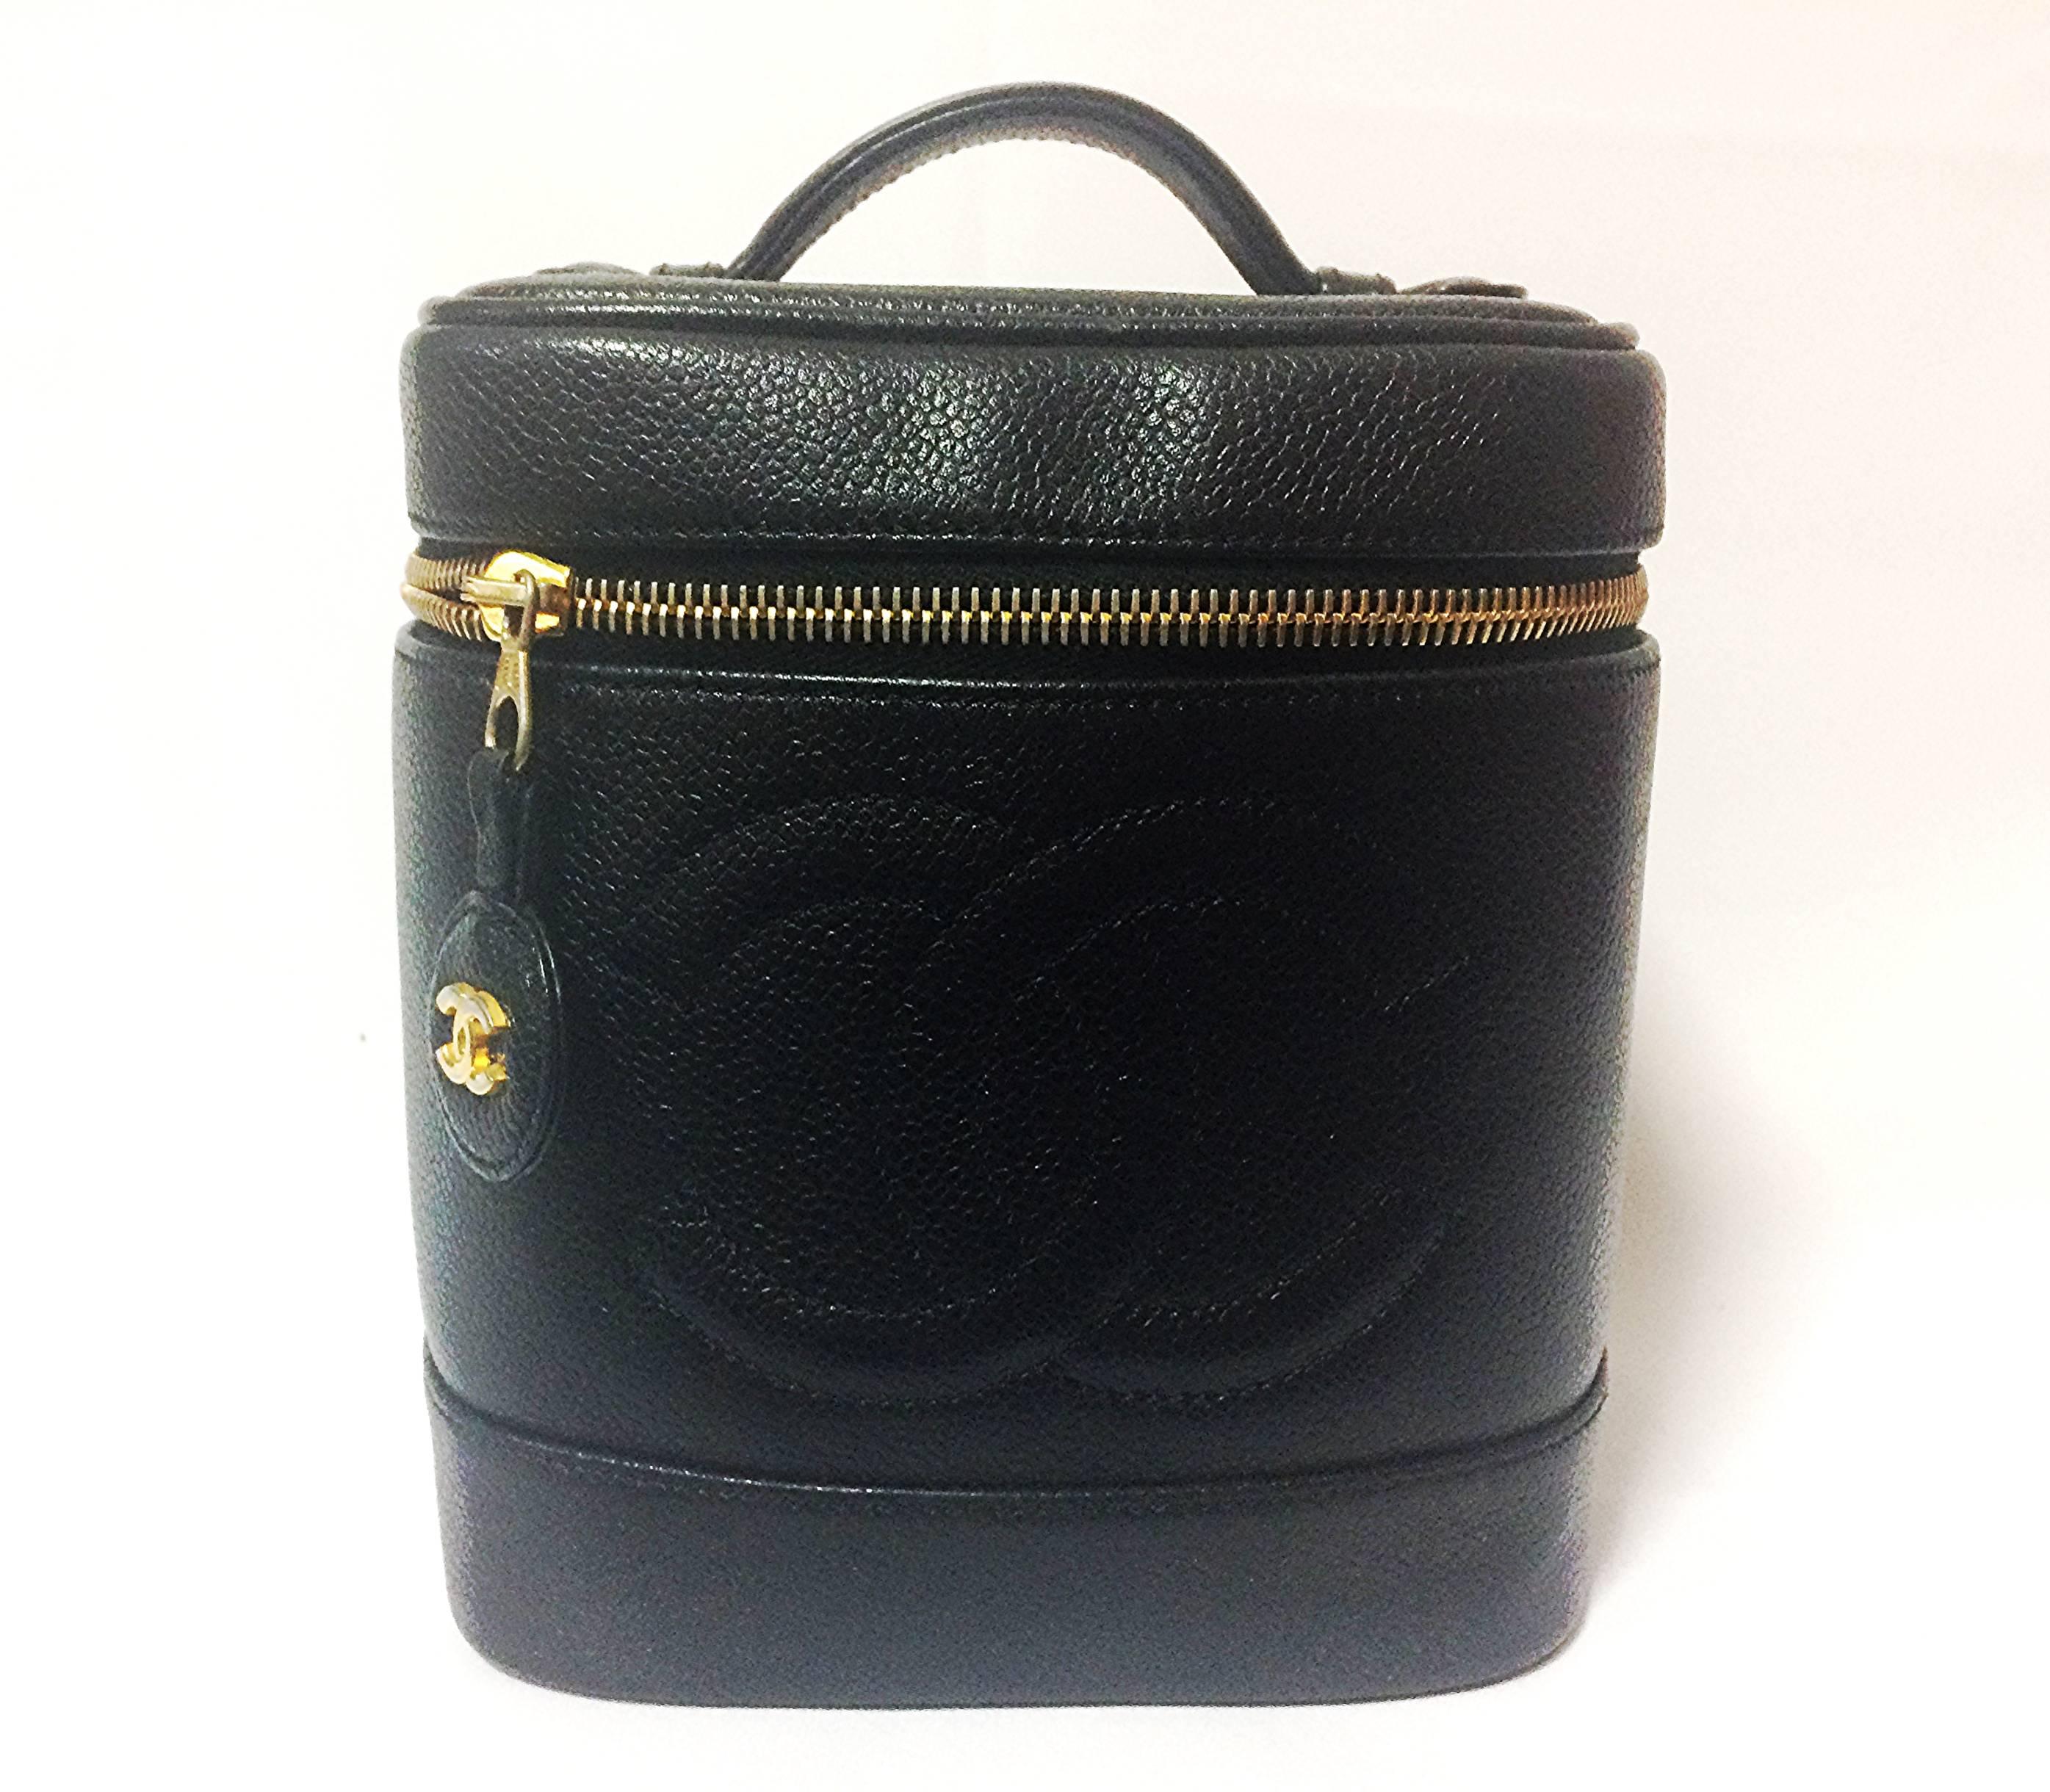 1990s. Vintage CHANEL black caviar leather cosmetic and toiletry mini bag, party vanity bag

Beautiful condition! Don't miss.....

Introducing another classic vintage piece from CHANEL.... cosmetic, party vanity purse, mini handbag made out of